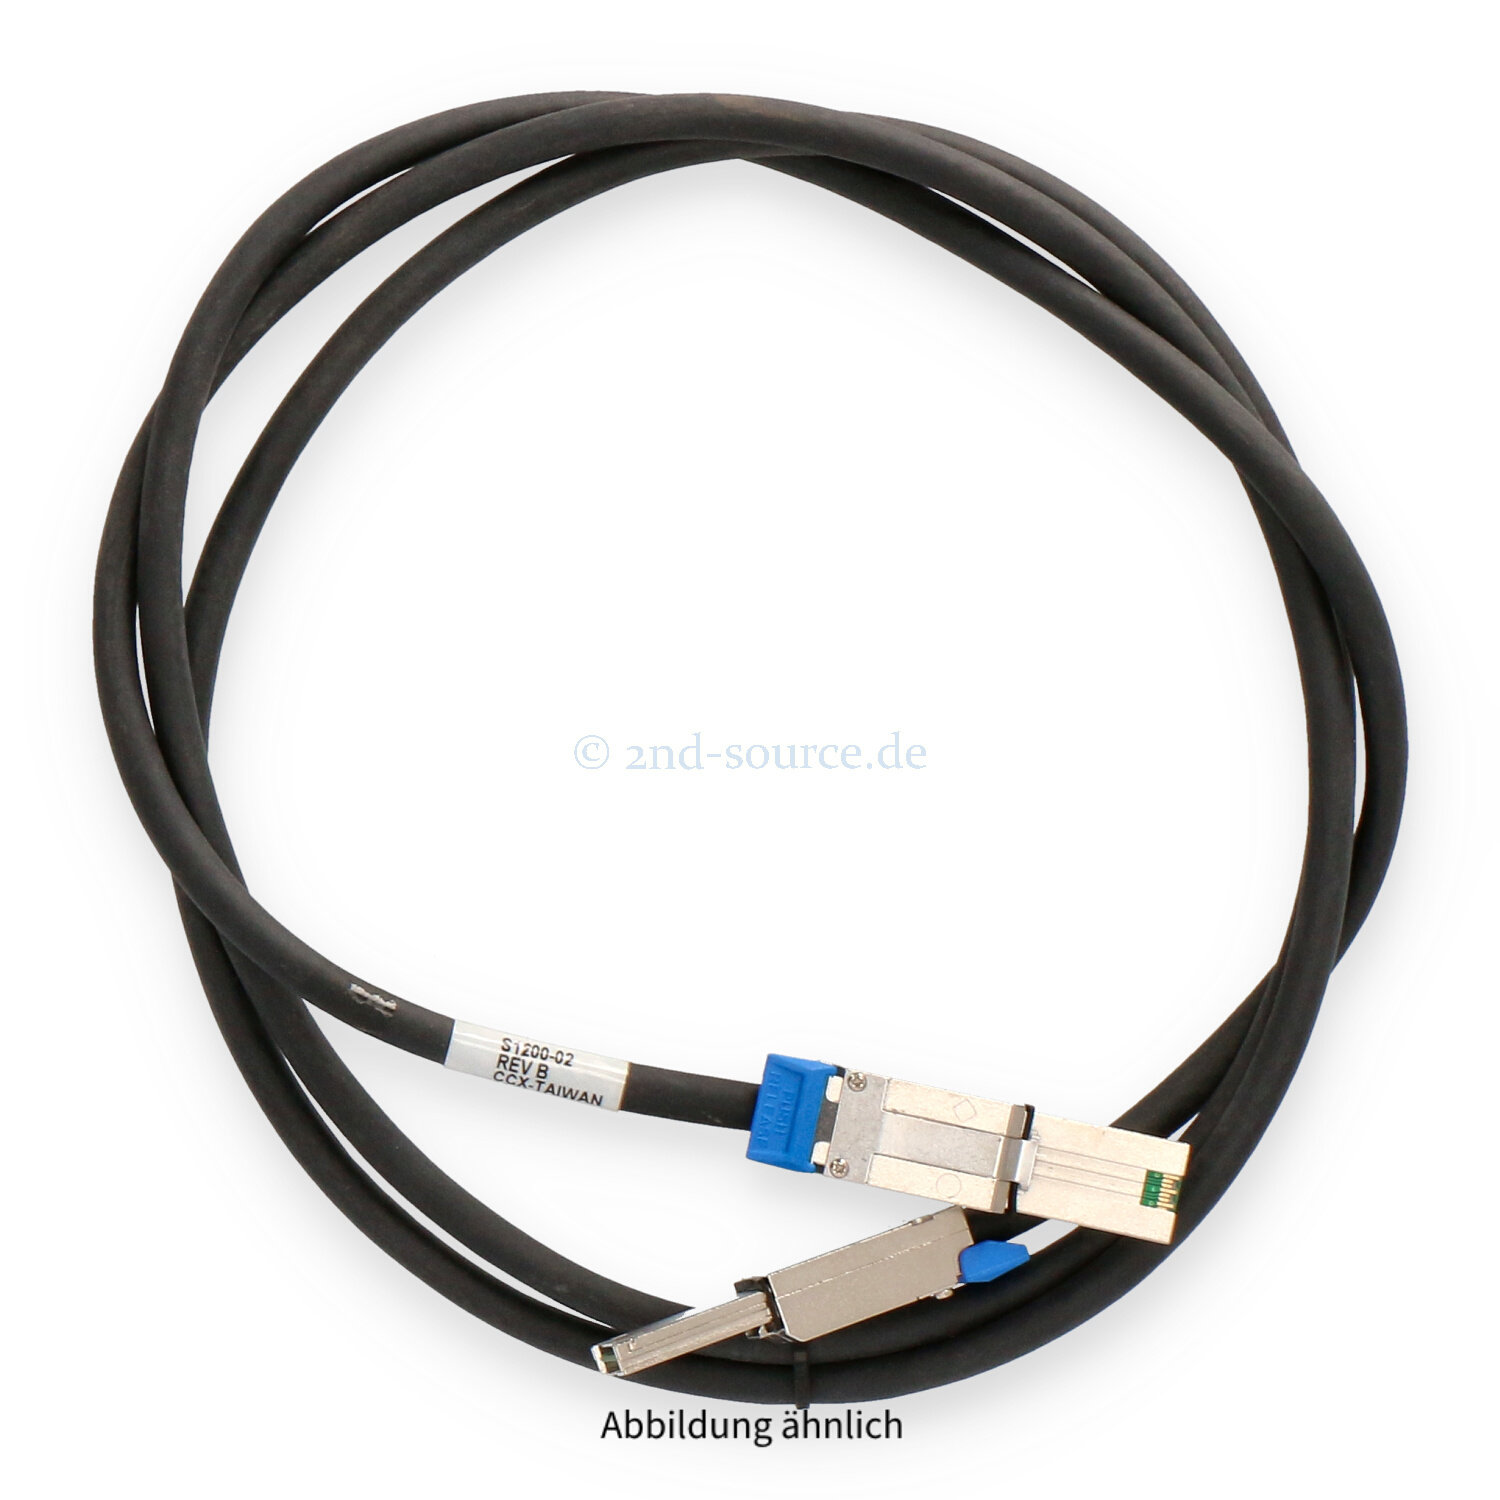 Dell 2.0m MiniSAS SFF-8088 to SFF-8088 Cable HGDCV 0HGDCV